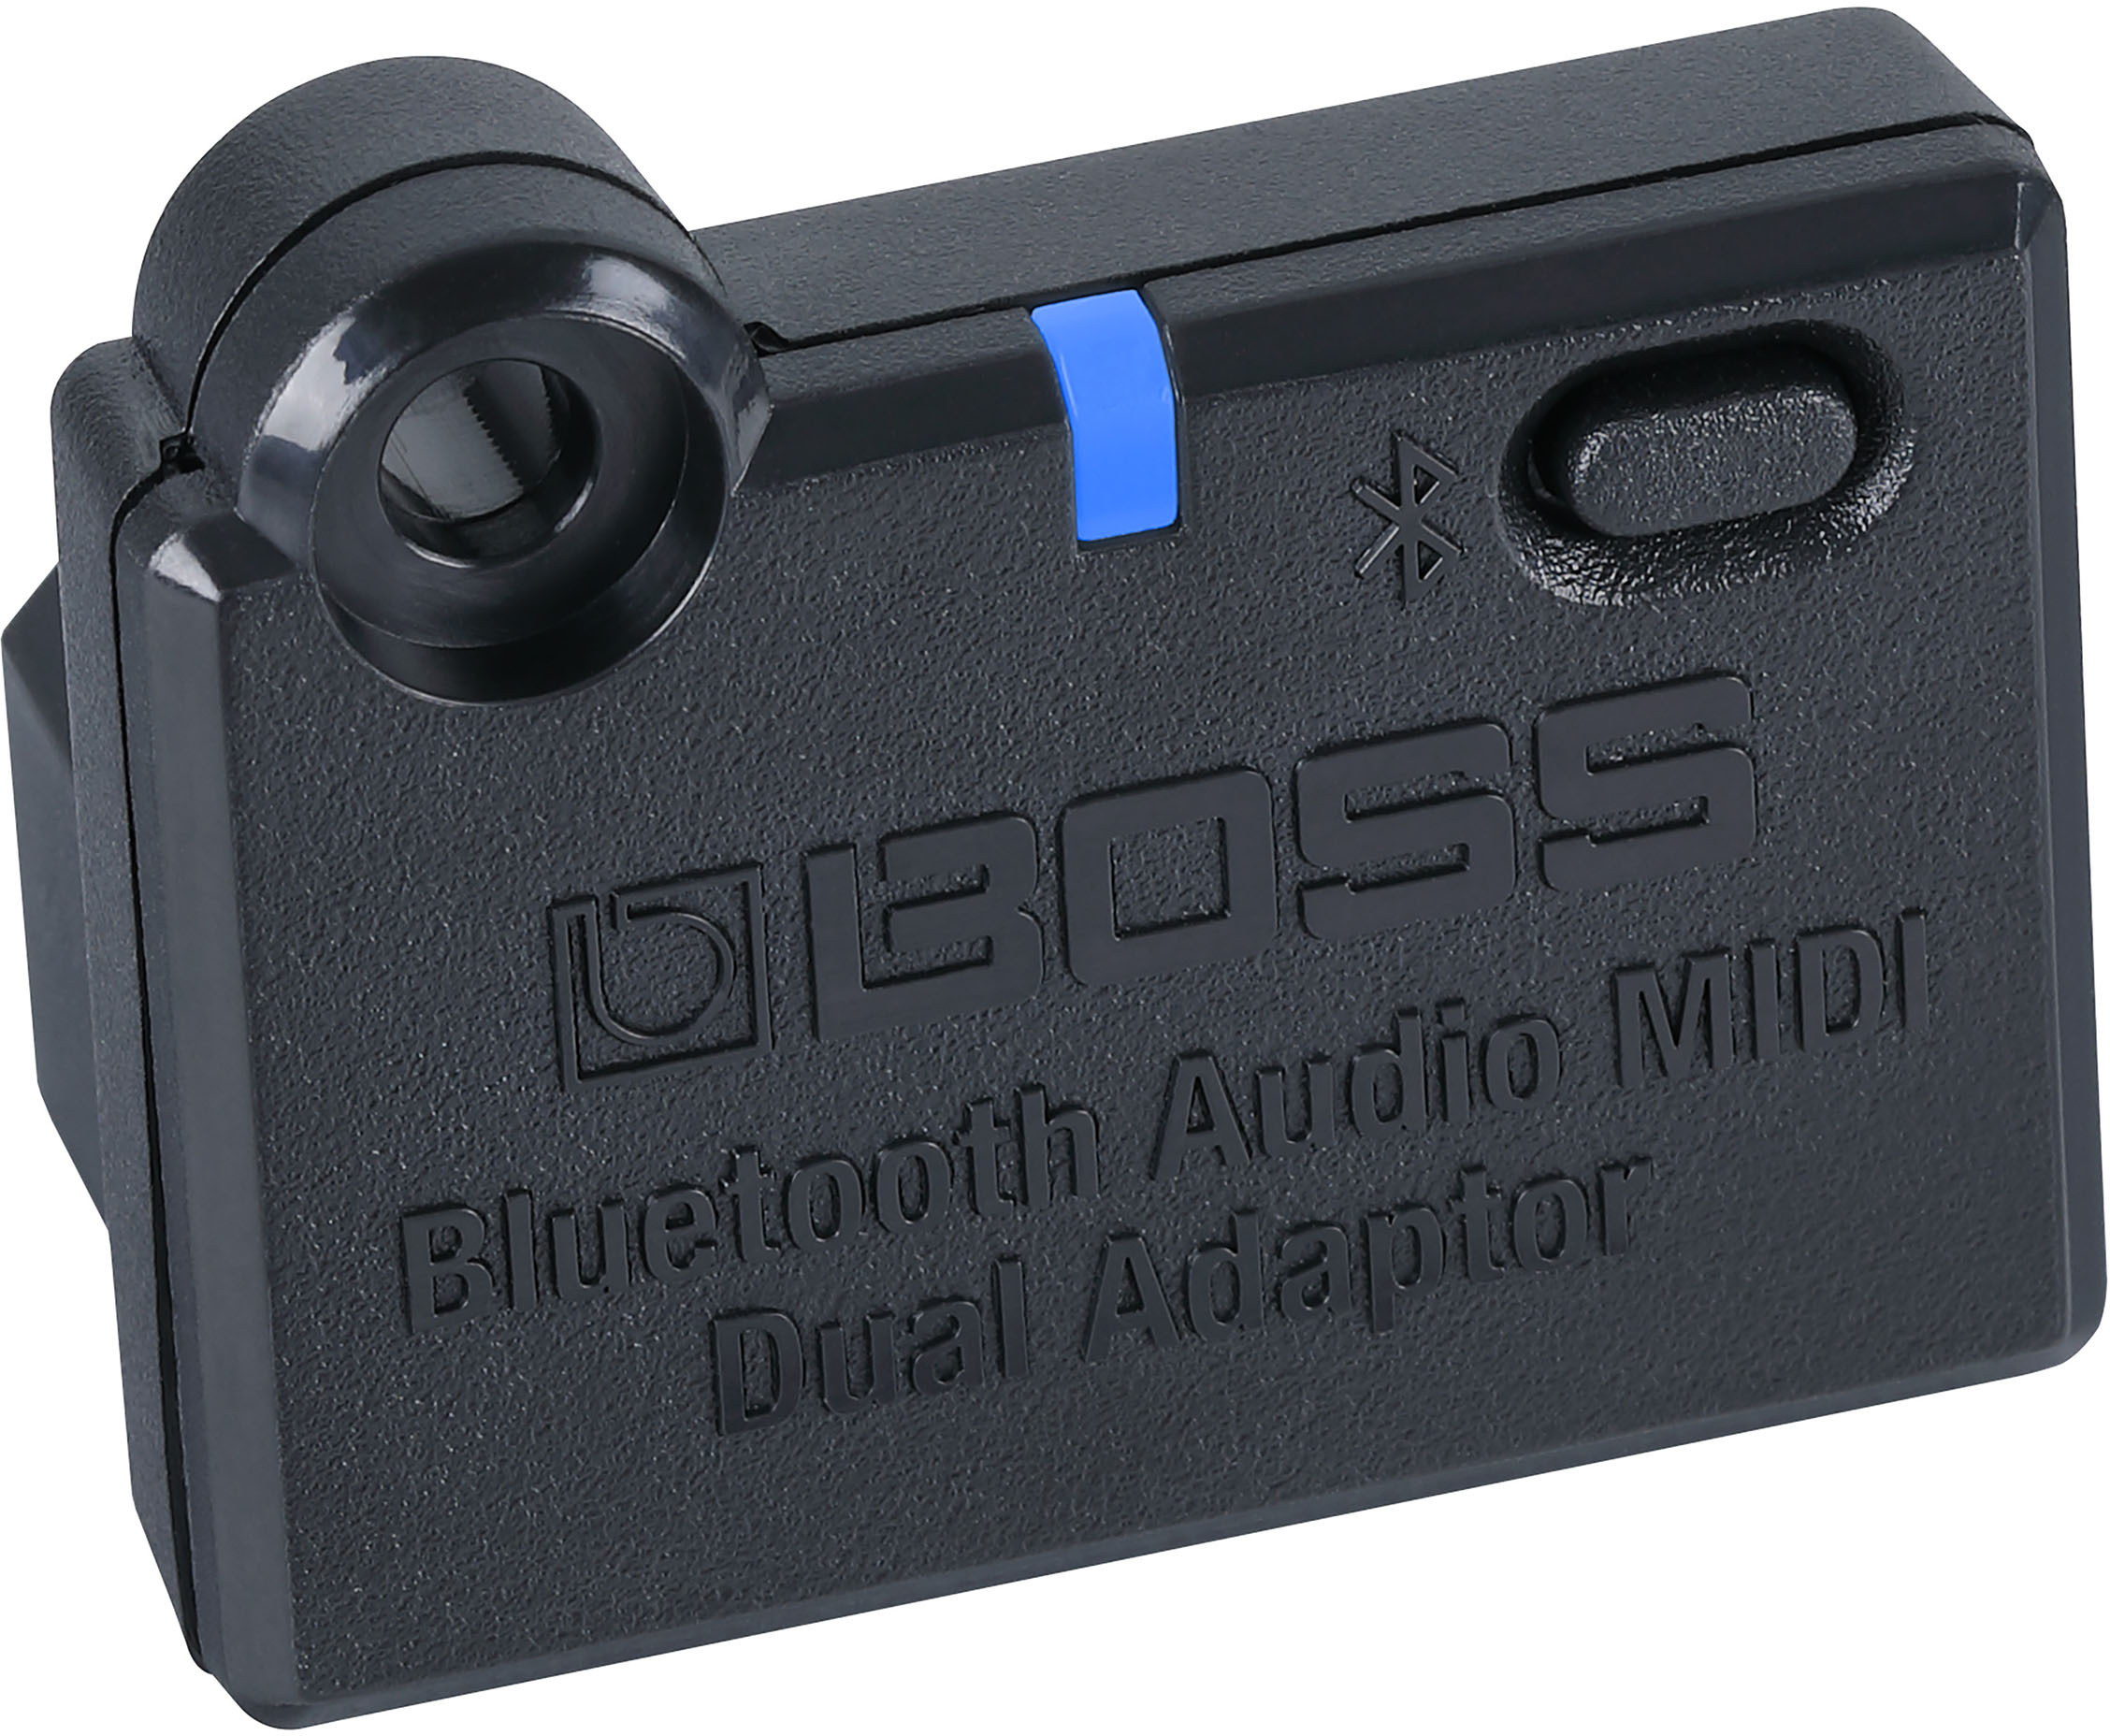 Boss Bluetooth Audio Adaptator - More access for guitar effects - Main picture